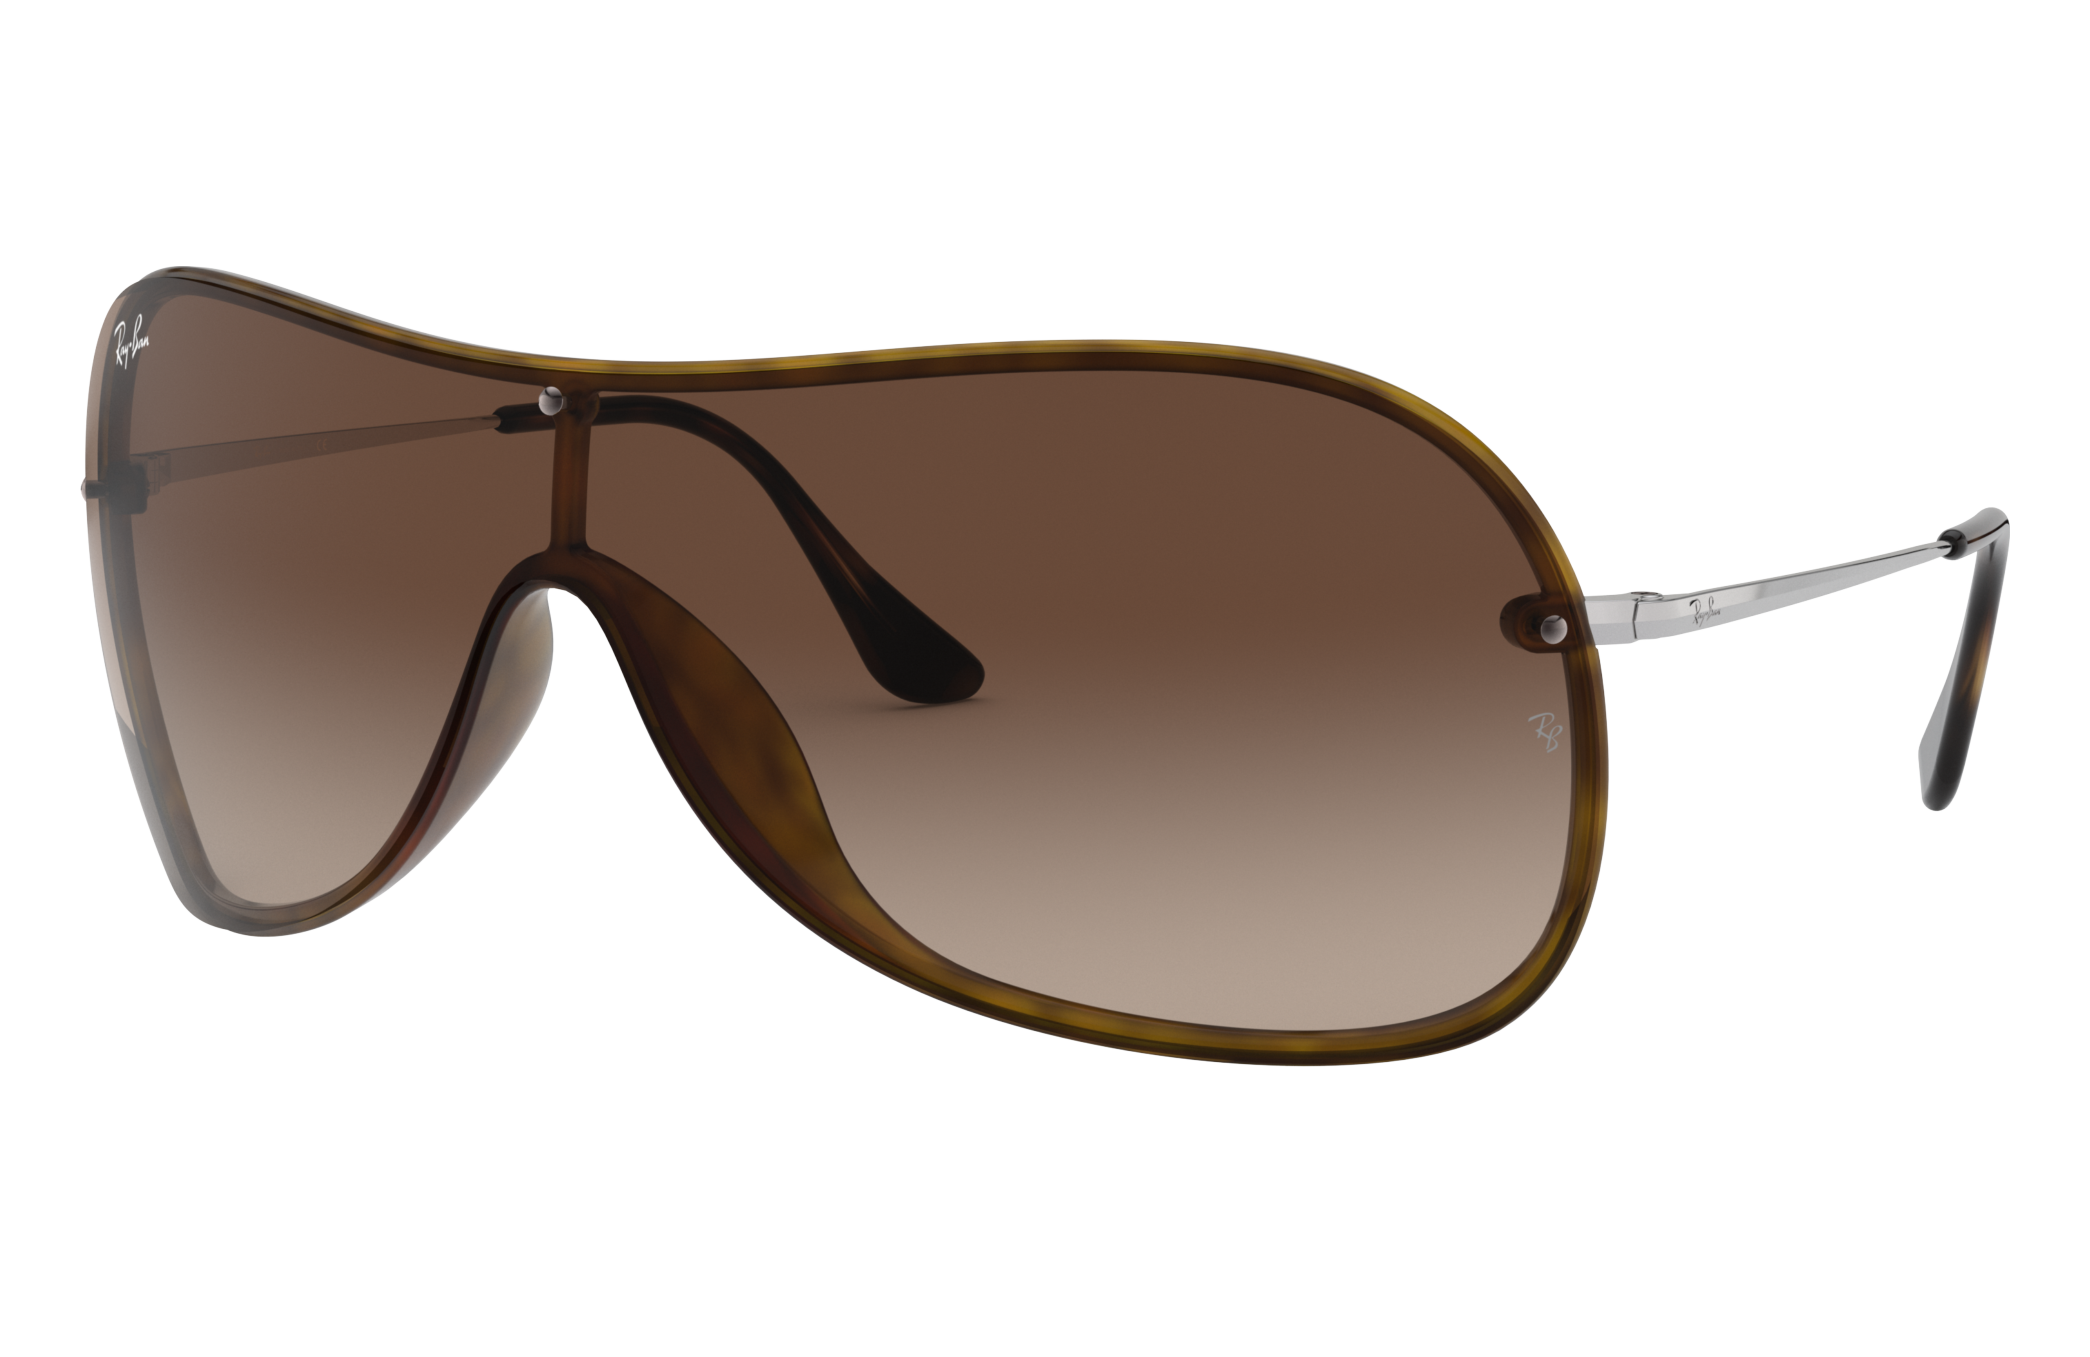 Rb4411 Sunglasses in Havana and |